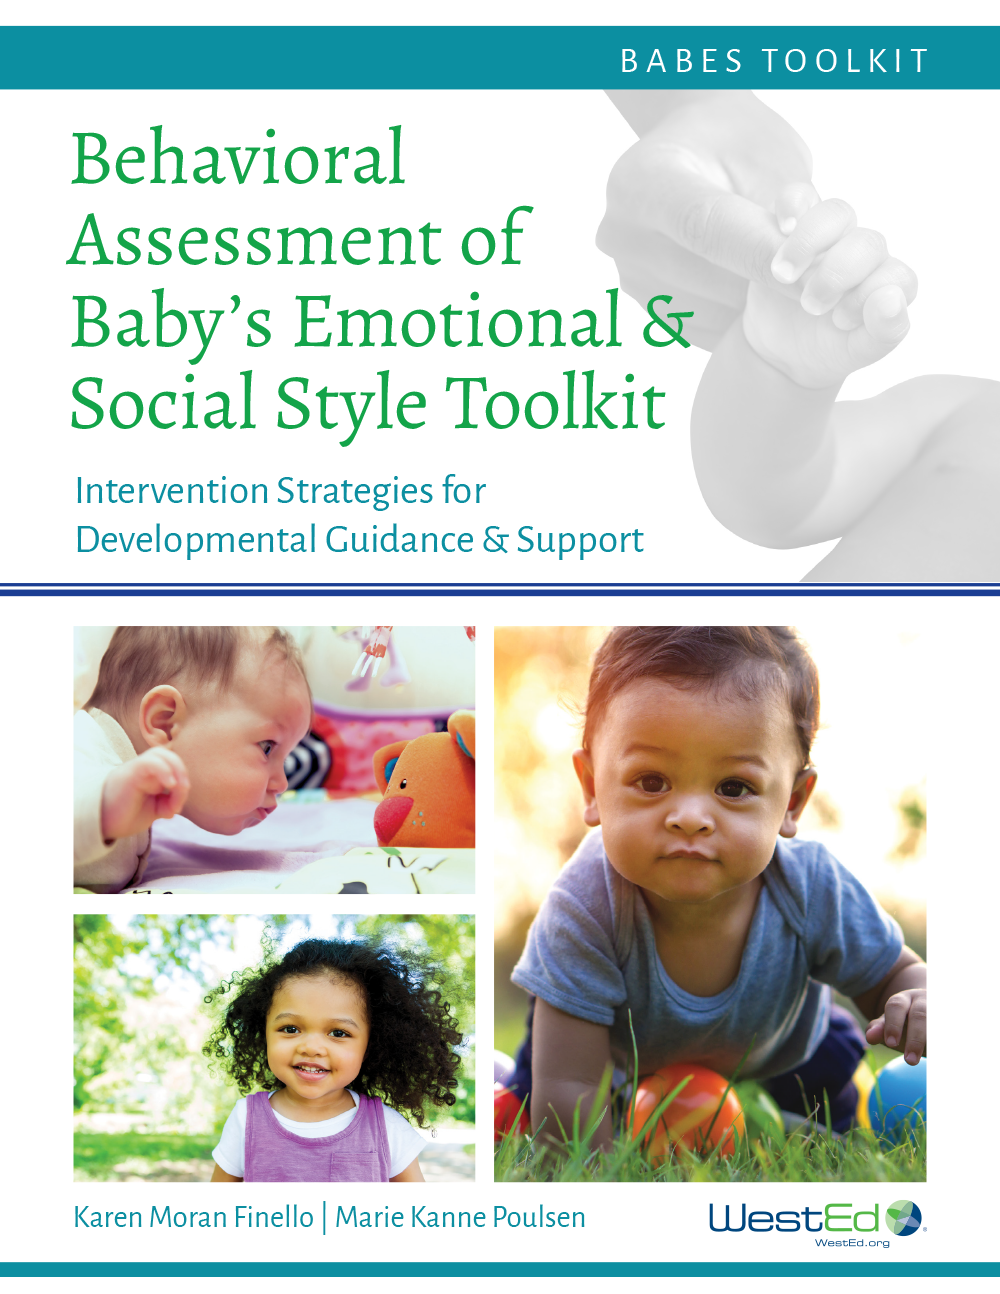 Behavioral Assessment of Baby’s Emotional & Social Style (BABES) Toolkit